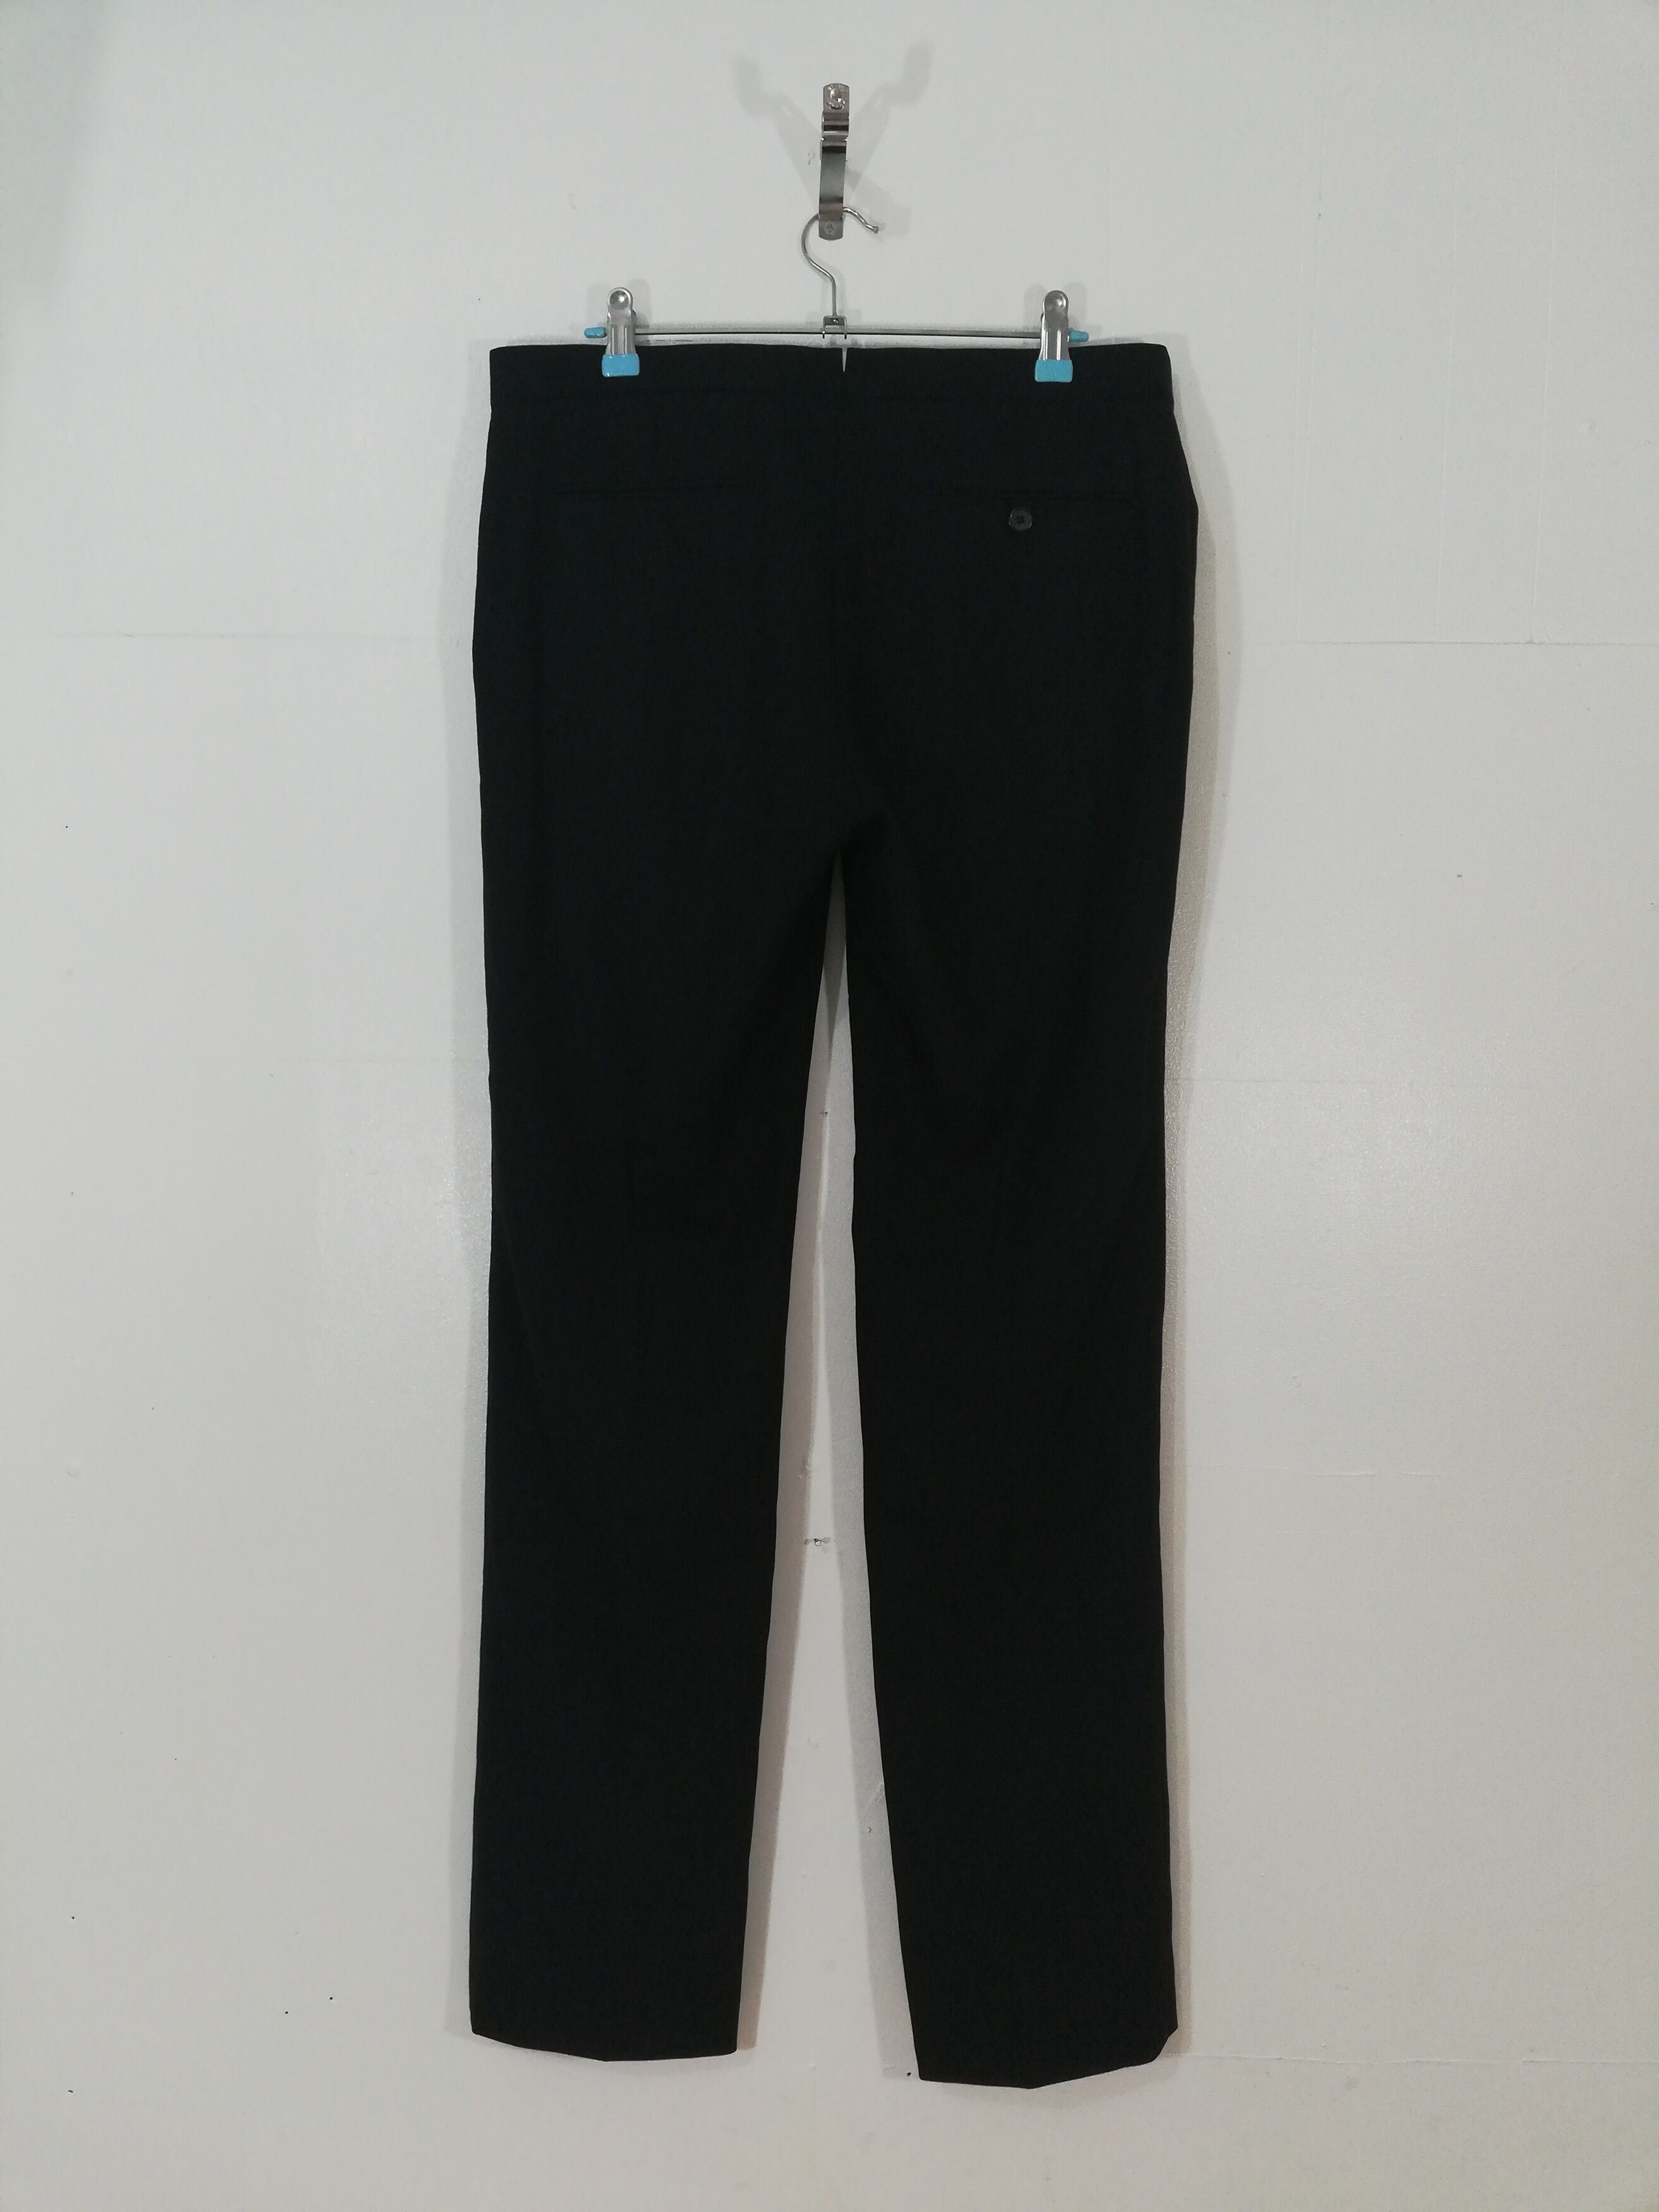 AW09 "Mirror" Runway Belted Wool Trousers - 4